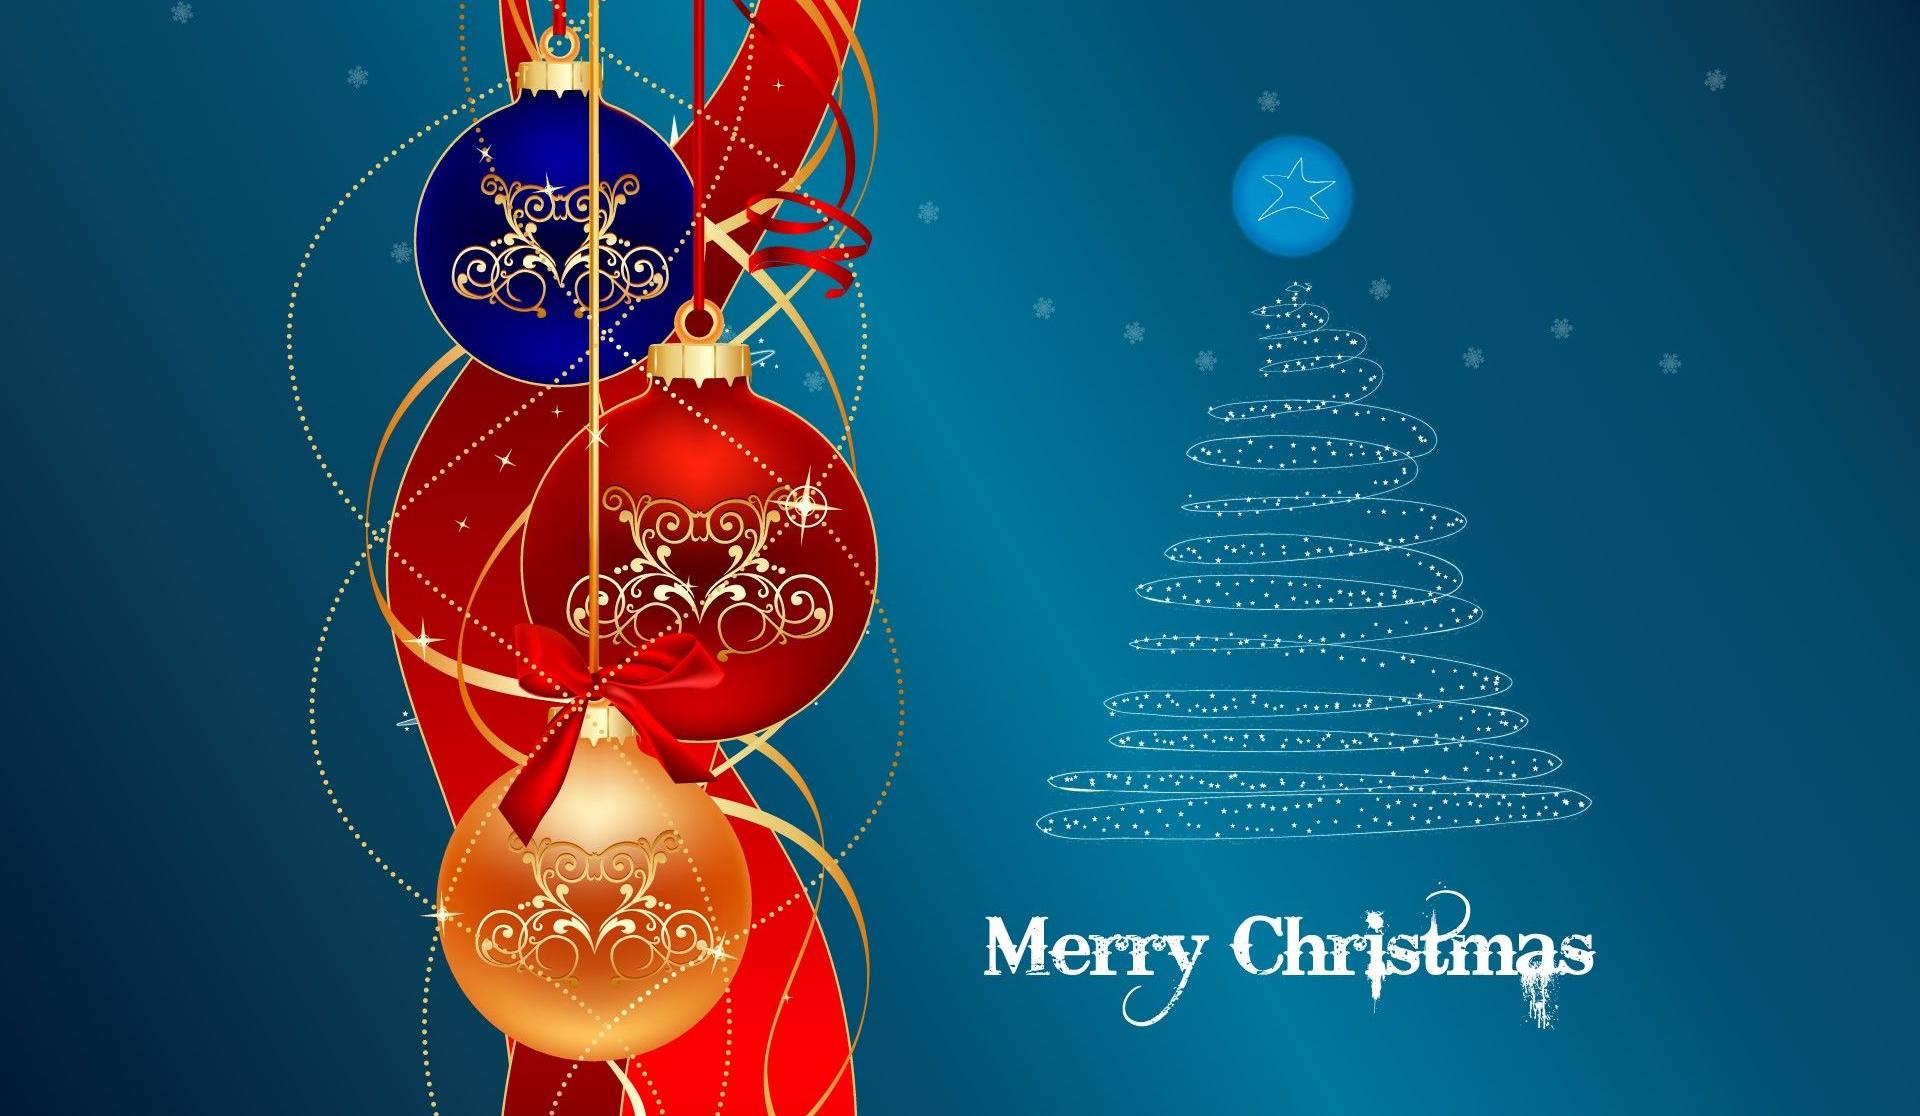 Light, blue, red, merry christmas ornaments backgrounds